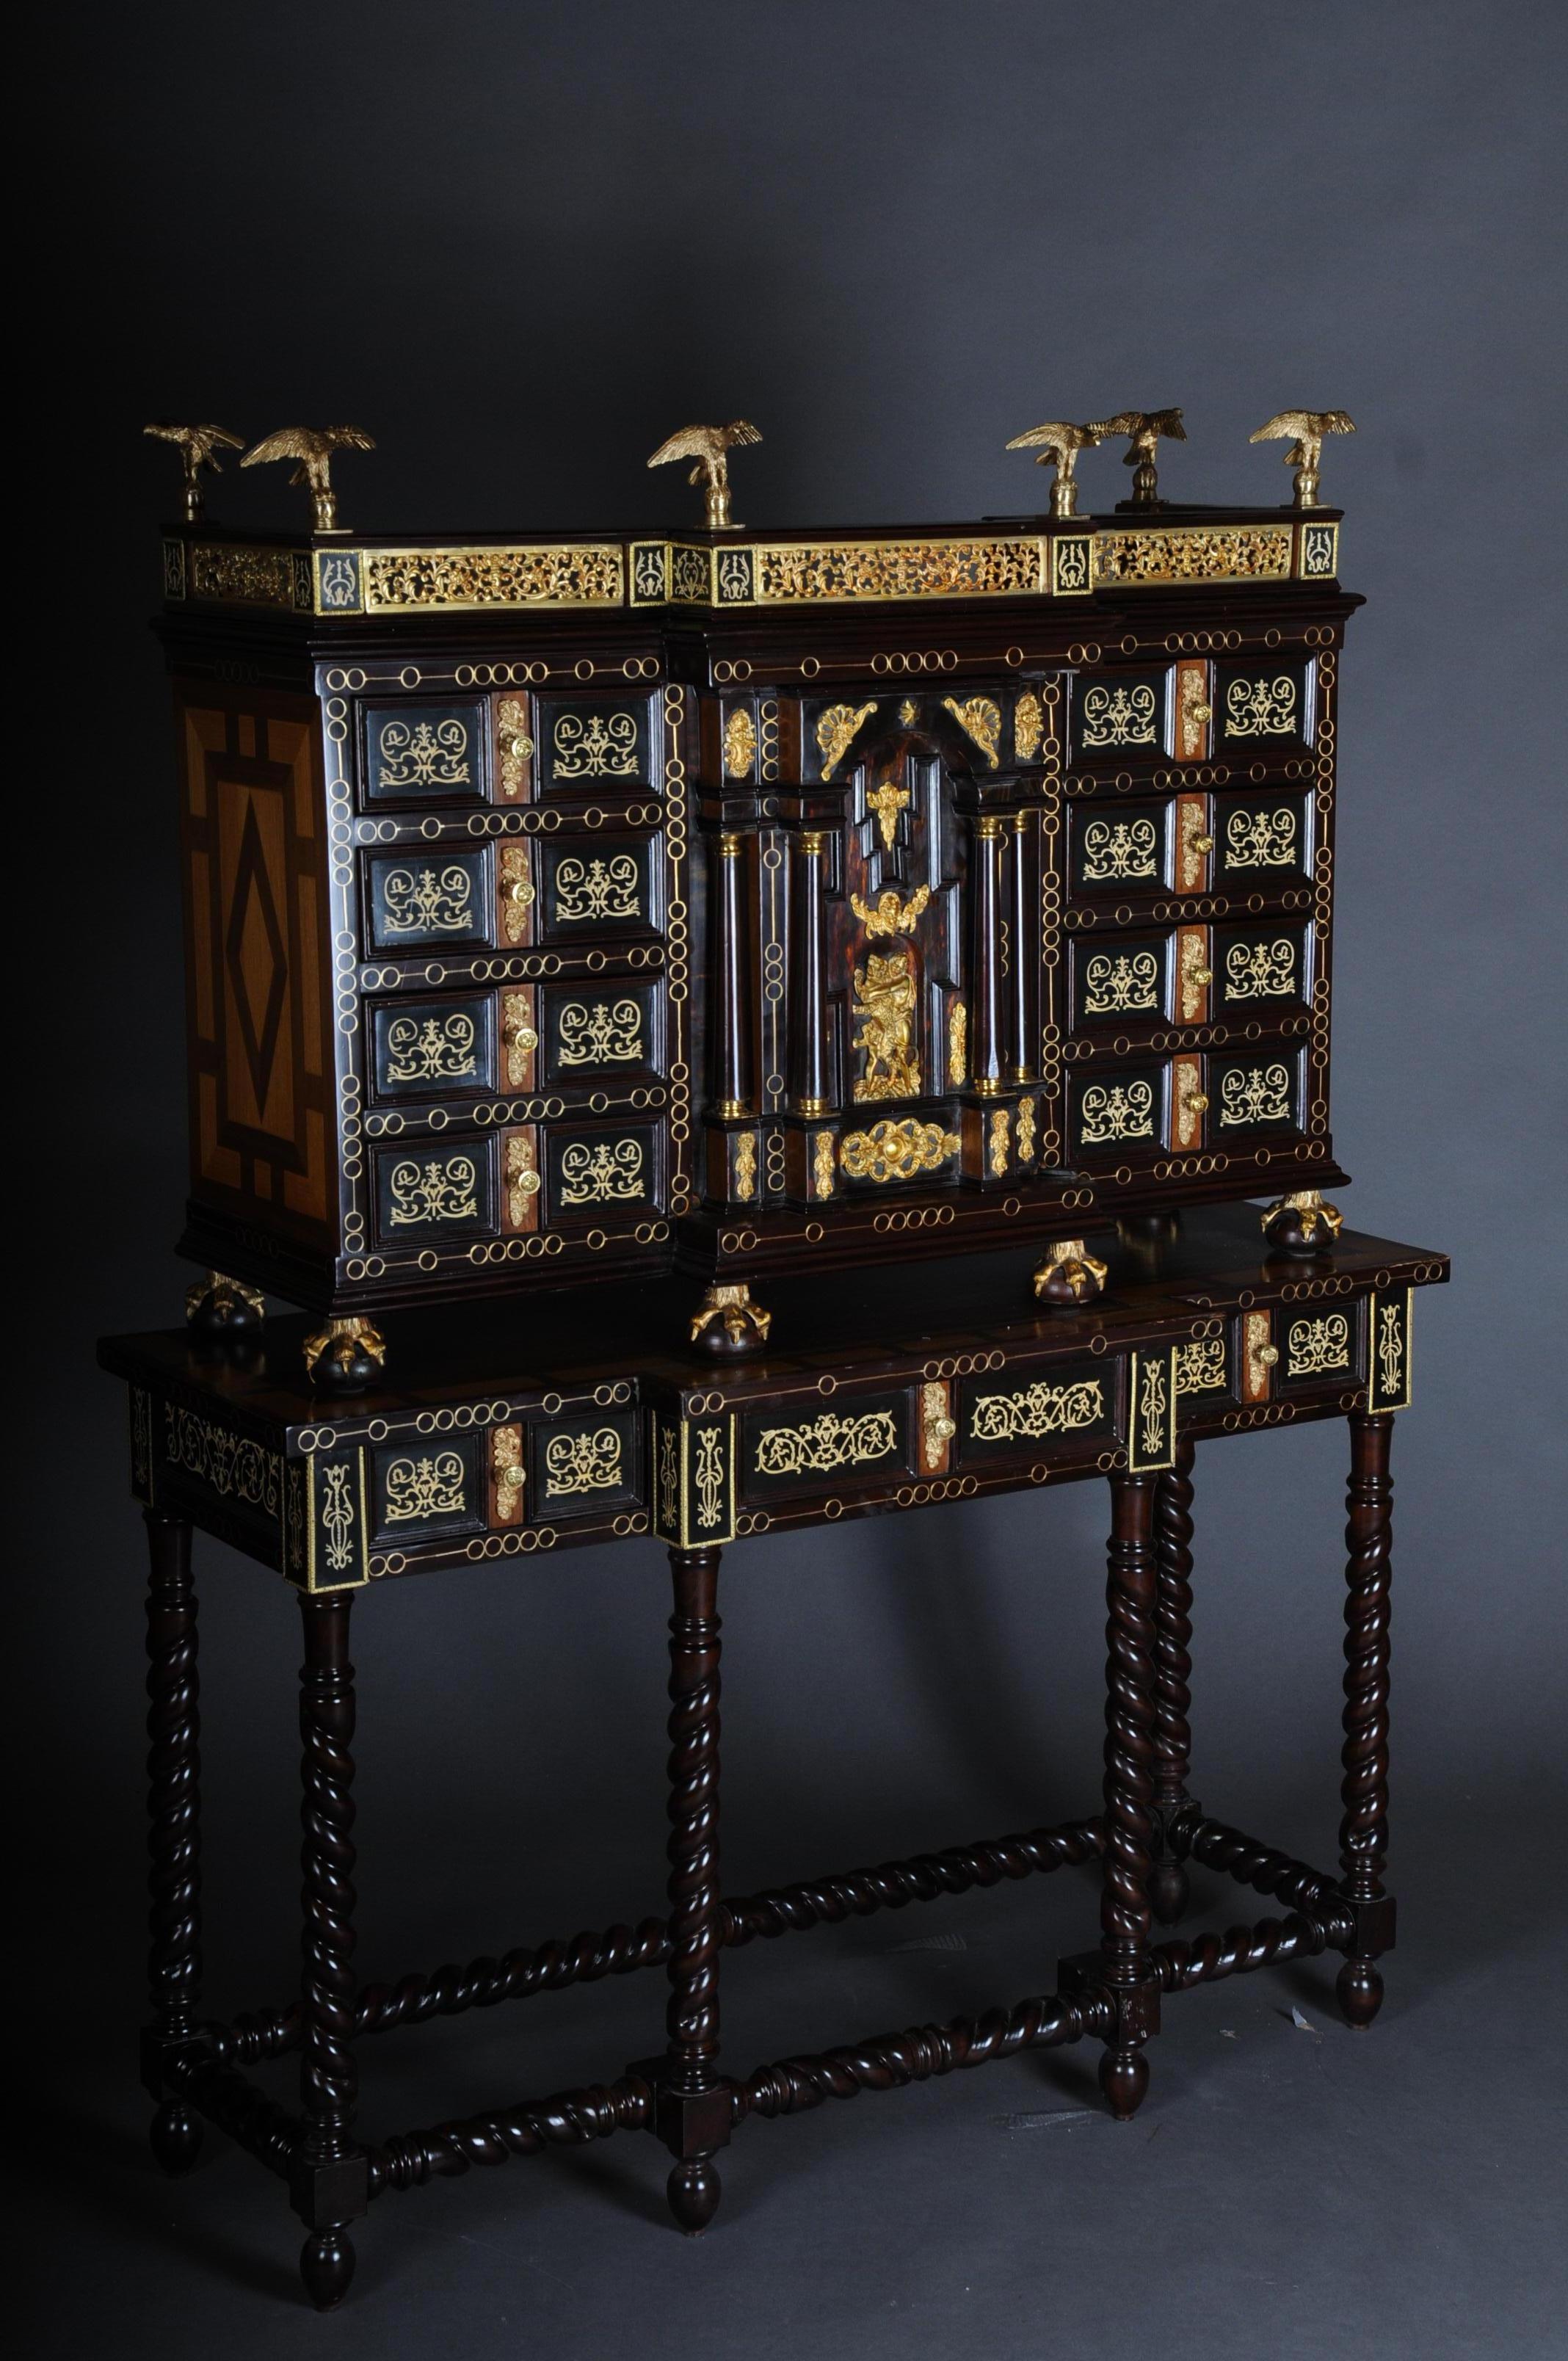 20th century splendid Renaissance tower cabinet

Cabinet cabinet marquetry with inlaid bone on solid wood. A total of 19 richly decorated drawers on the front and inside. Top crowned with brass gallery. In addition, 6 eagles symmetrically